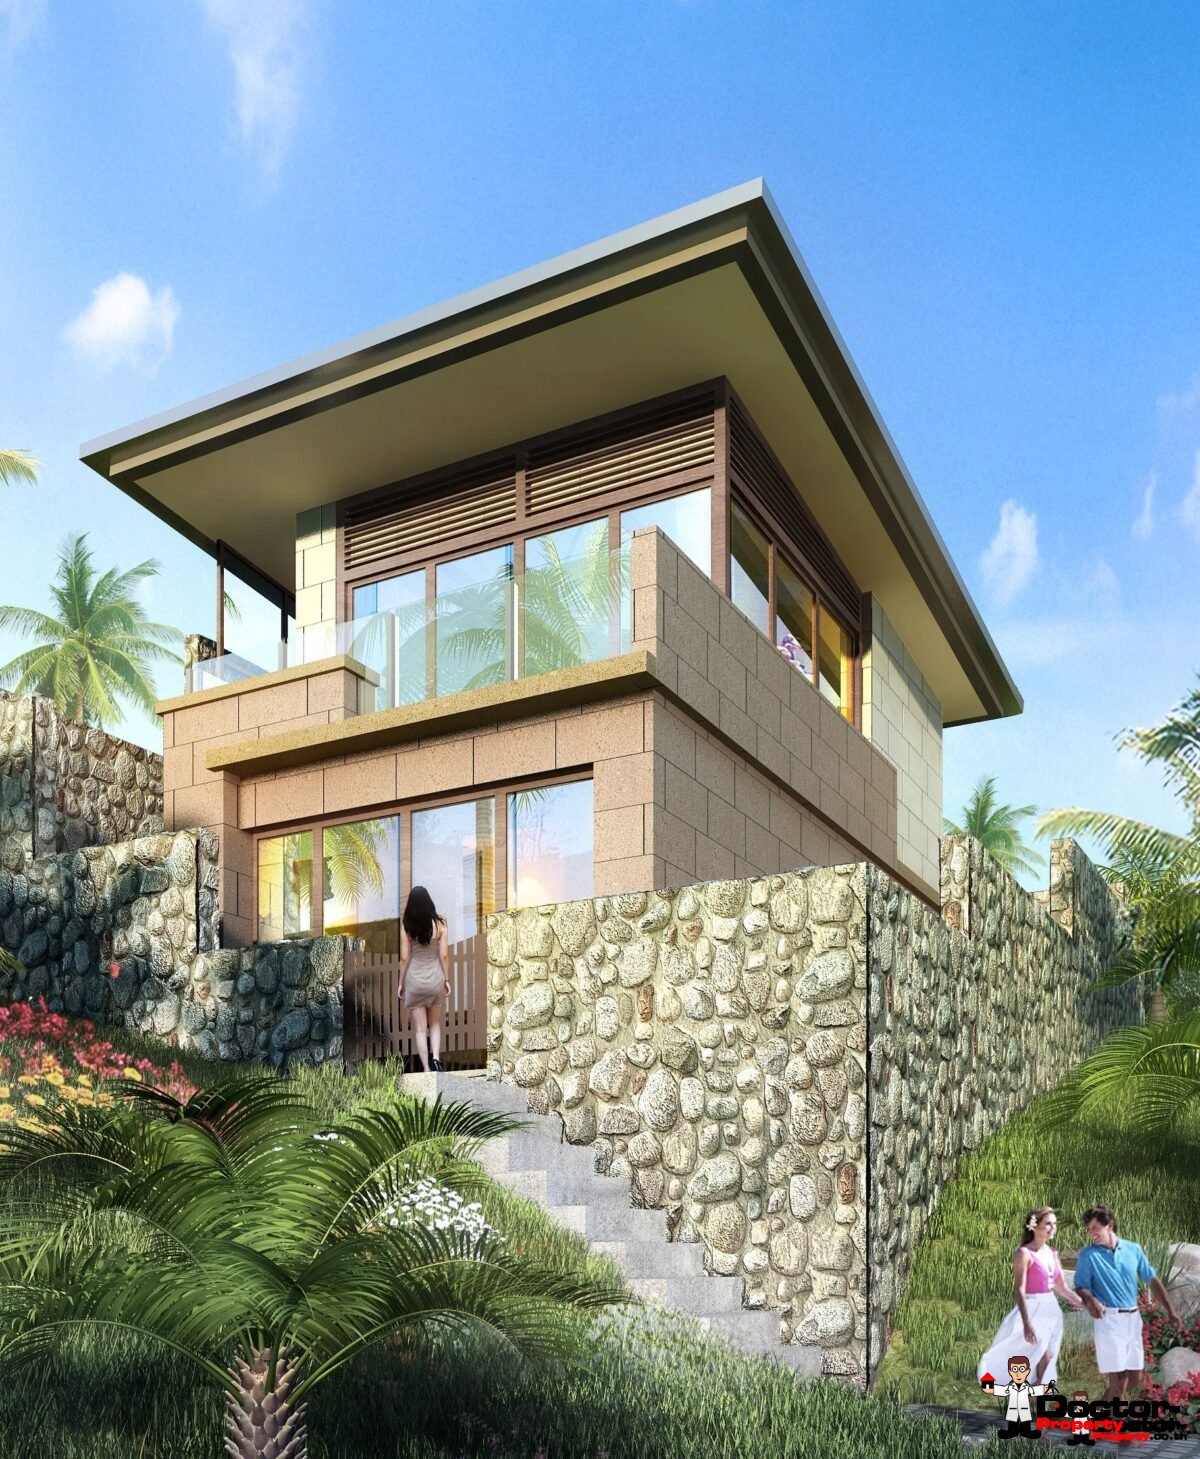 New 1 Bedroom Villa with Seaview - Chaweng Noi, Koh Samui -For Sale